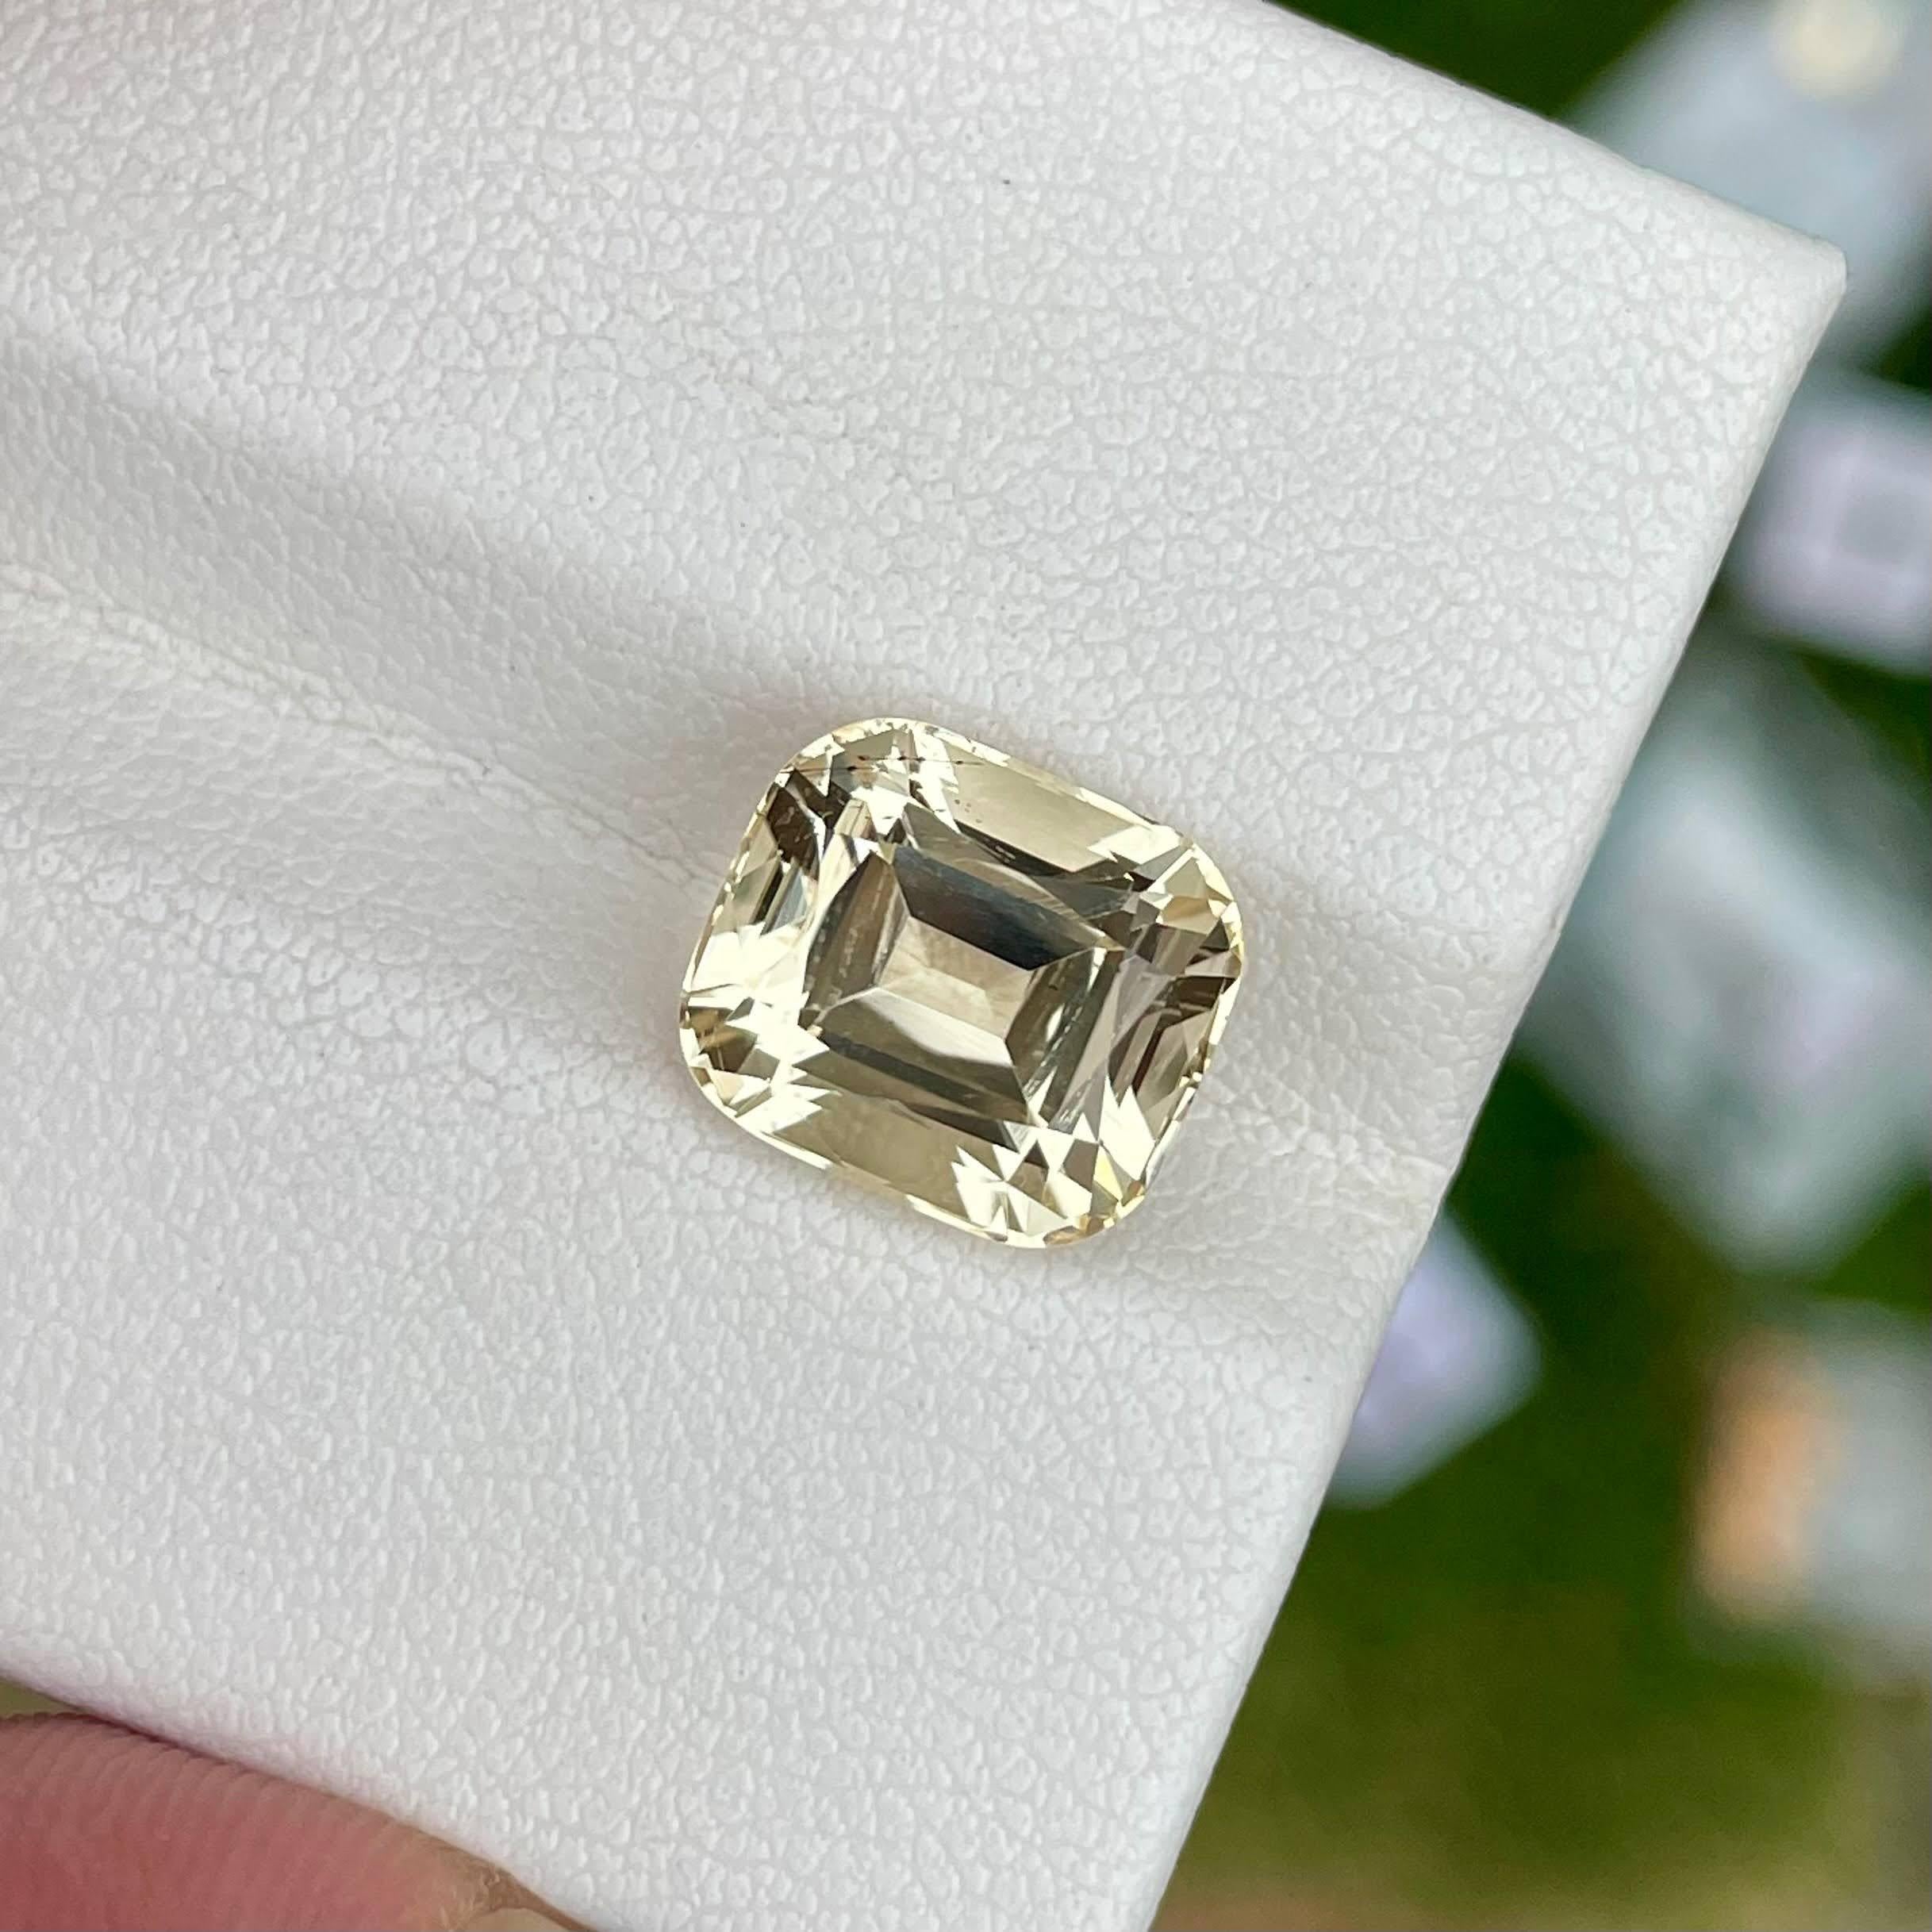 Weight 4.70 carats 
Dimensions 10.3x9.0x7.8 mm
Treatment none 
Origin Tanzania 
Clarity eye clean 
Shape cushion
Cut fancy cushion 



The 4.70 carats Light Yellow Scapolite Stone, crafted into a cushion cut, emanates a gentle and warm aura,